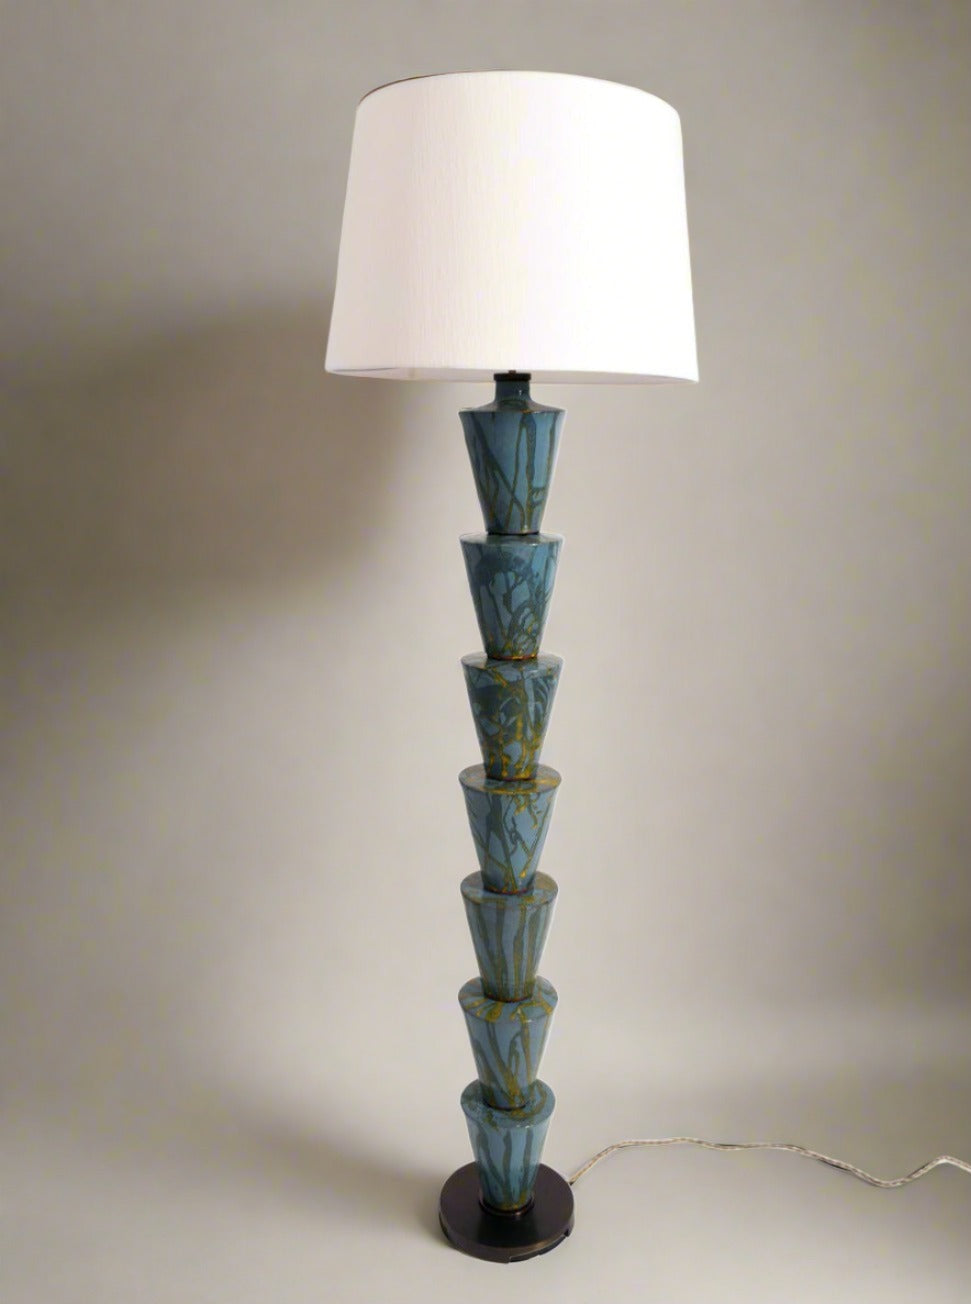 A tall, modern stoneware glazed "Nizwa" Floor Lamp by Barracuda Interiors with a stacked, geometric blue-green ceramic base and a large, white lampshade. The base consists of six cone-shaped sections with gold veining and sits on an iron platform. This exquisite piece, made in Portugal, features a power cord extending from the base.